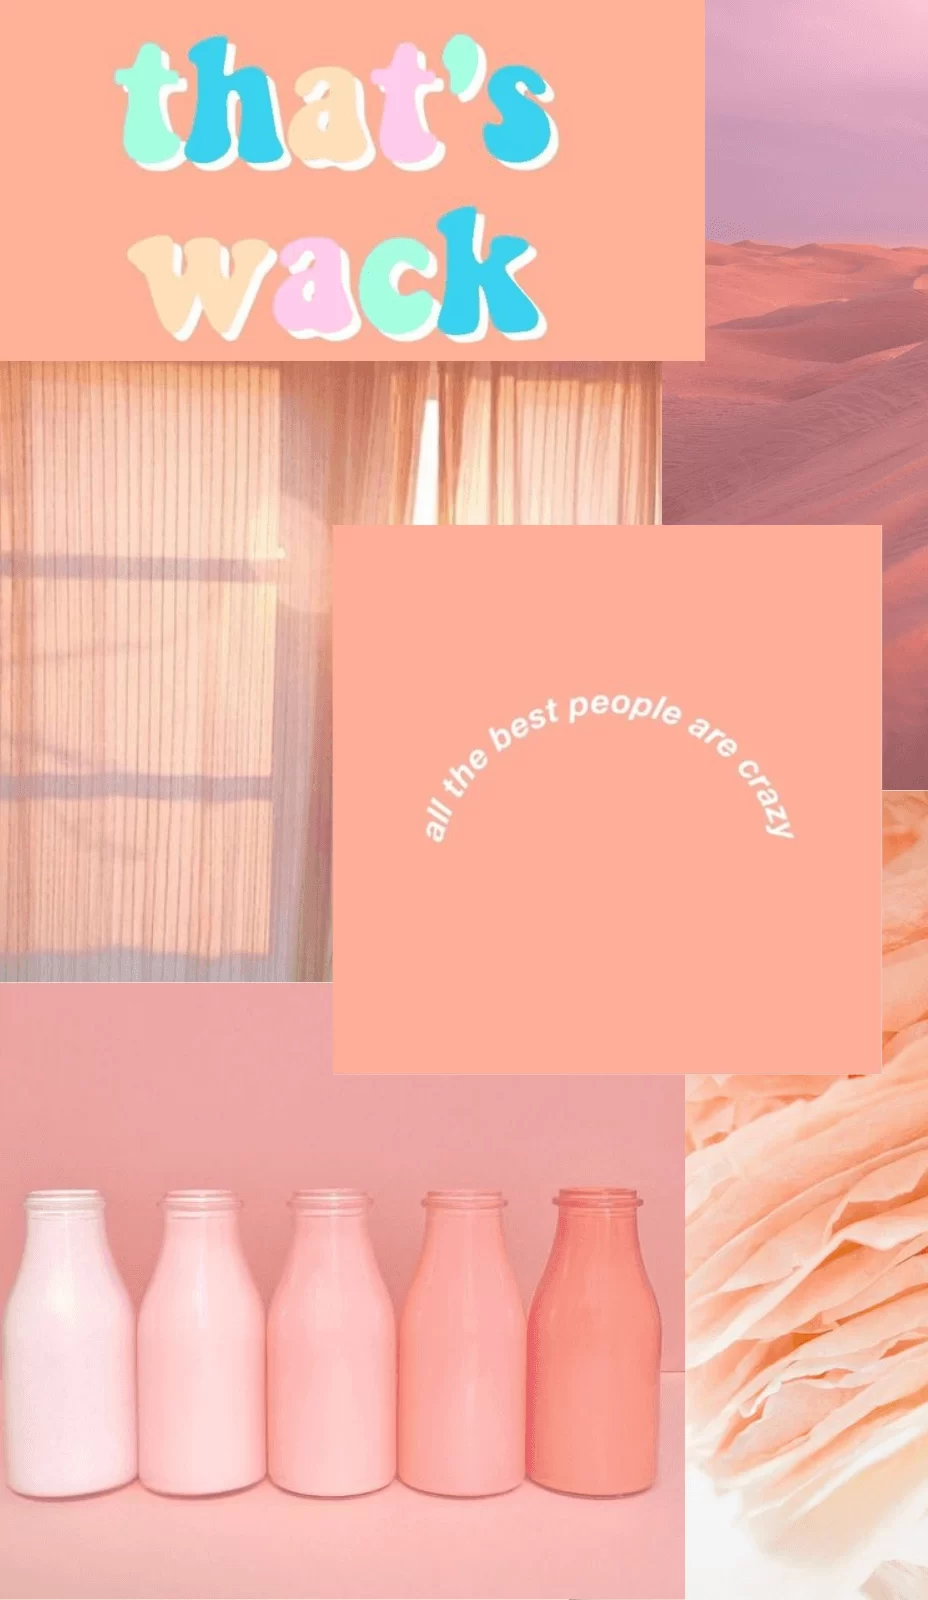 Aesthetic background of pink milk bottles, a pink sky, and the words 